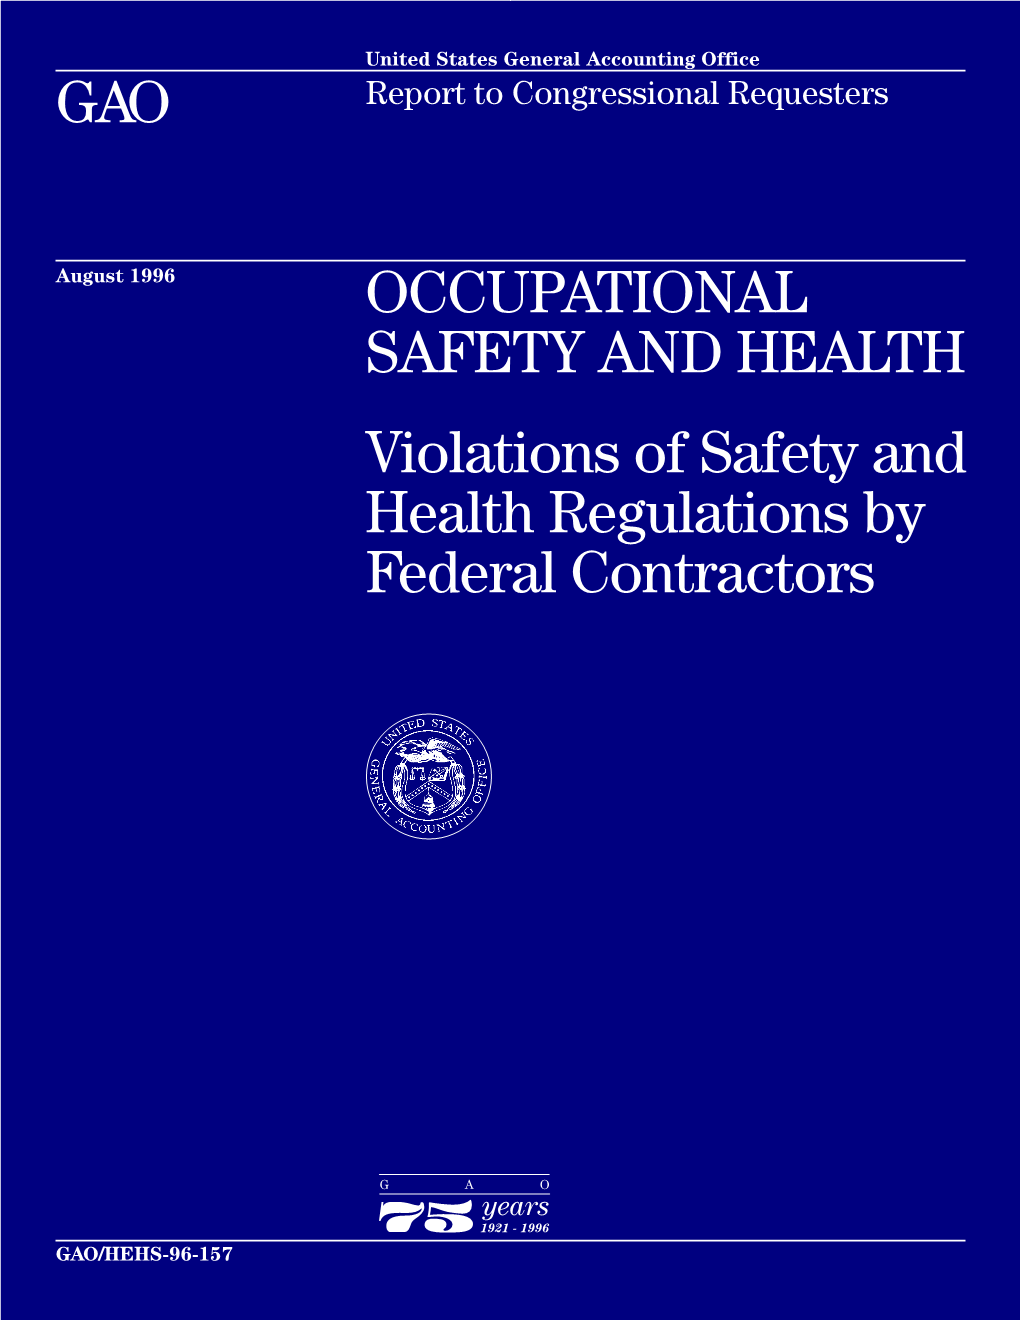 HEHS-96-157 Occupational Safety and Health